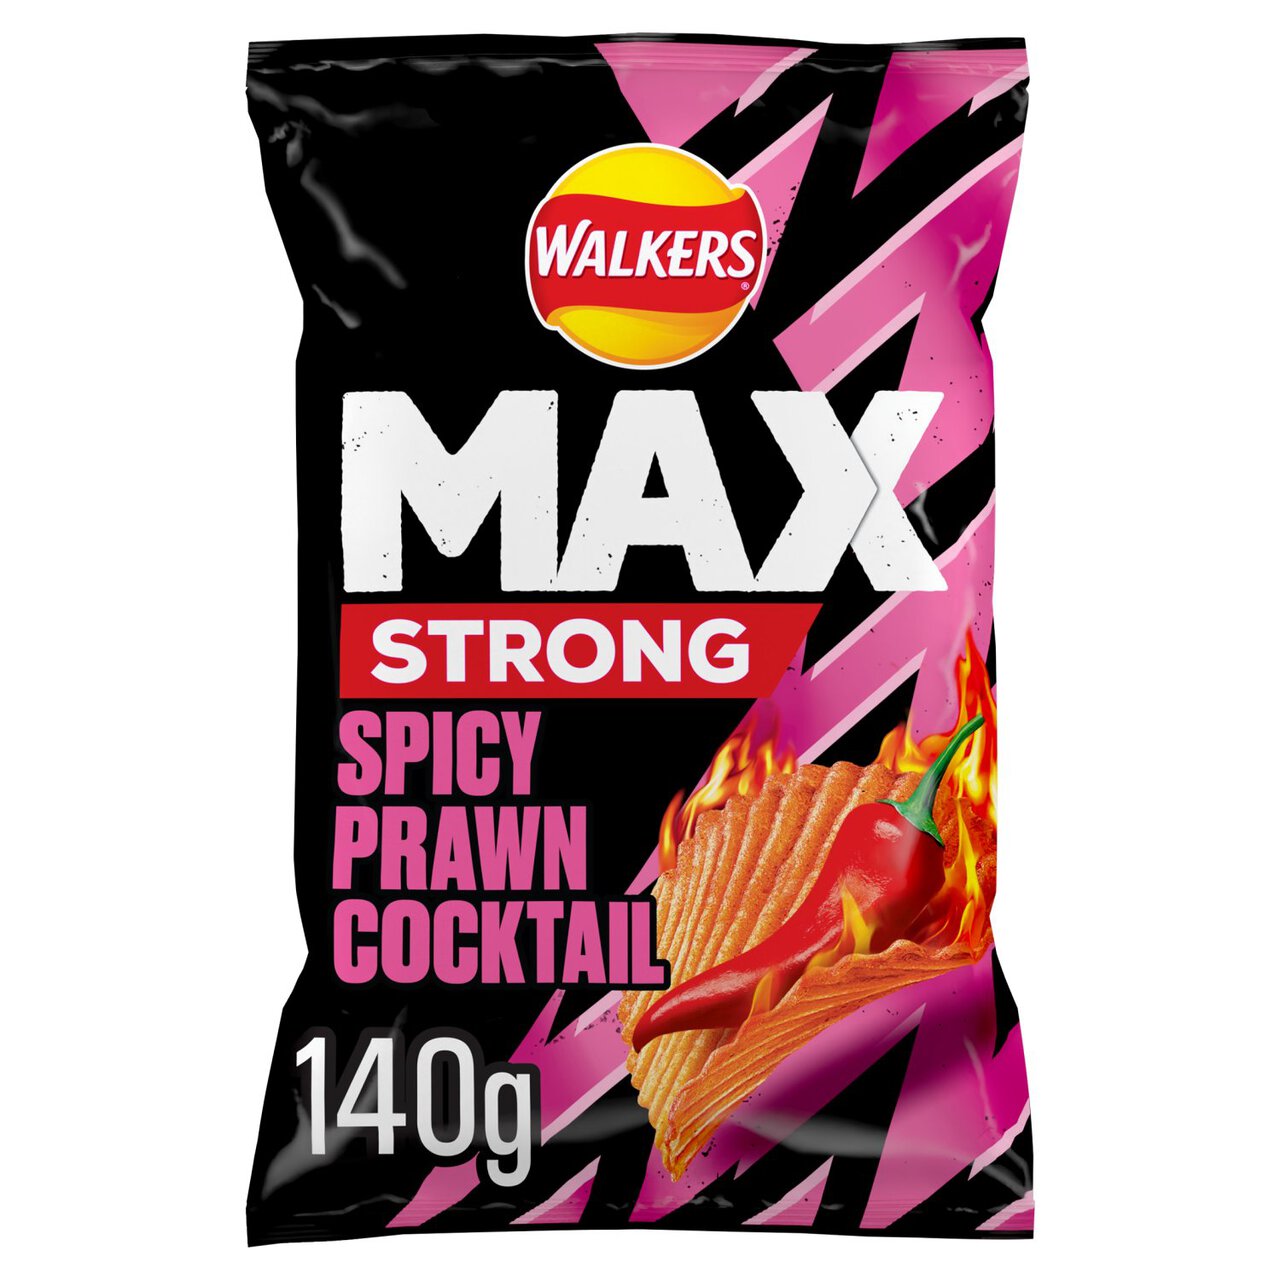 Walkers Max Strong Fiery Prawn Cocktail Sharing Bag Crisps 140g